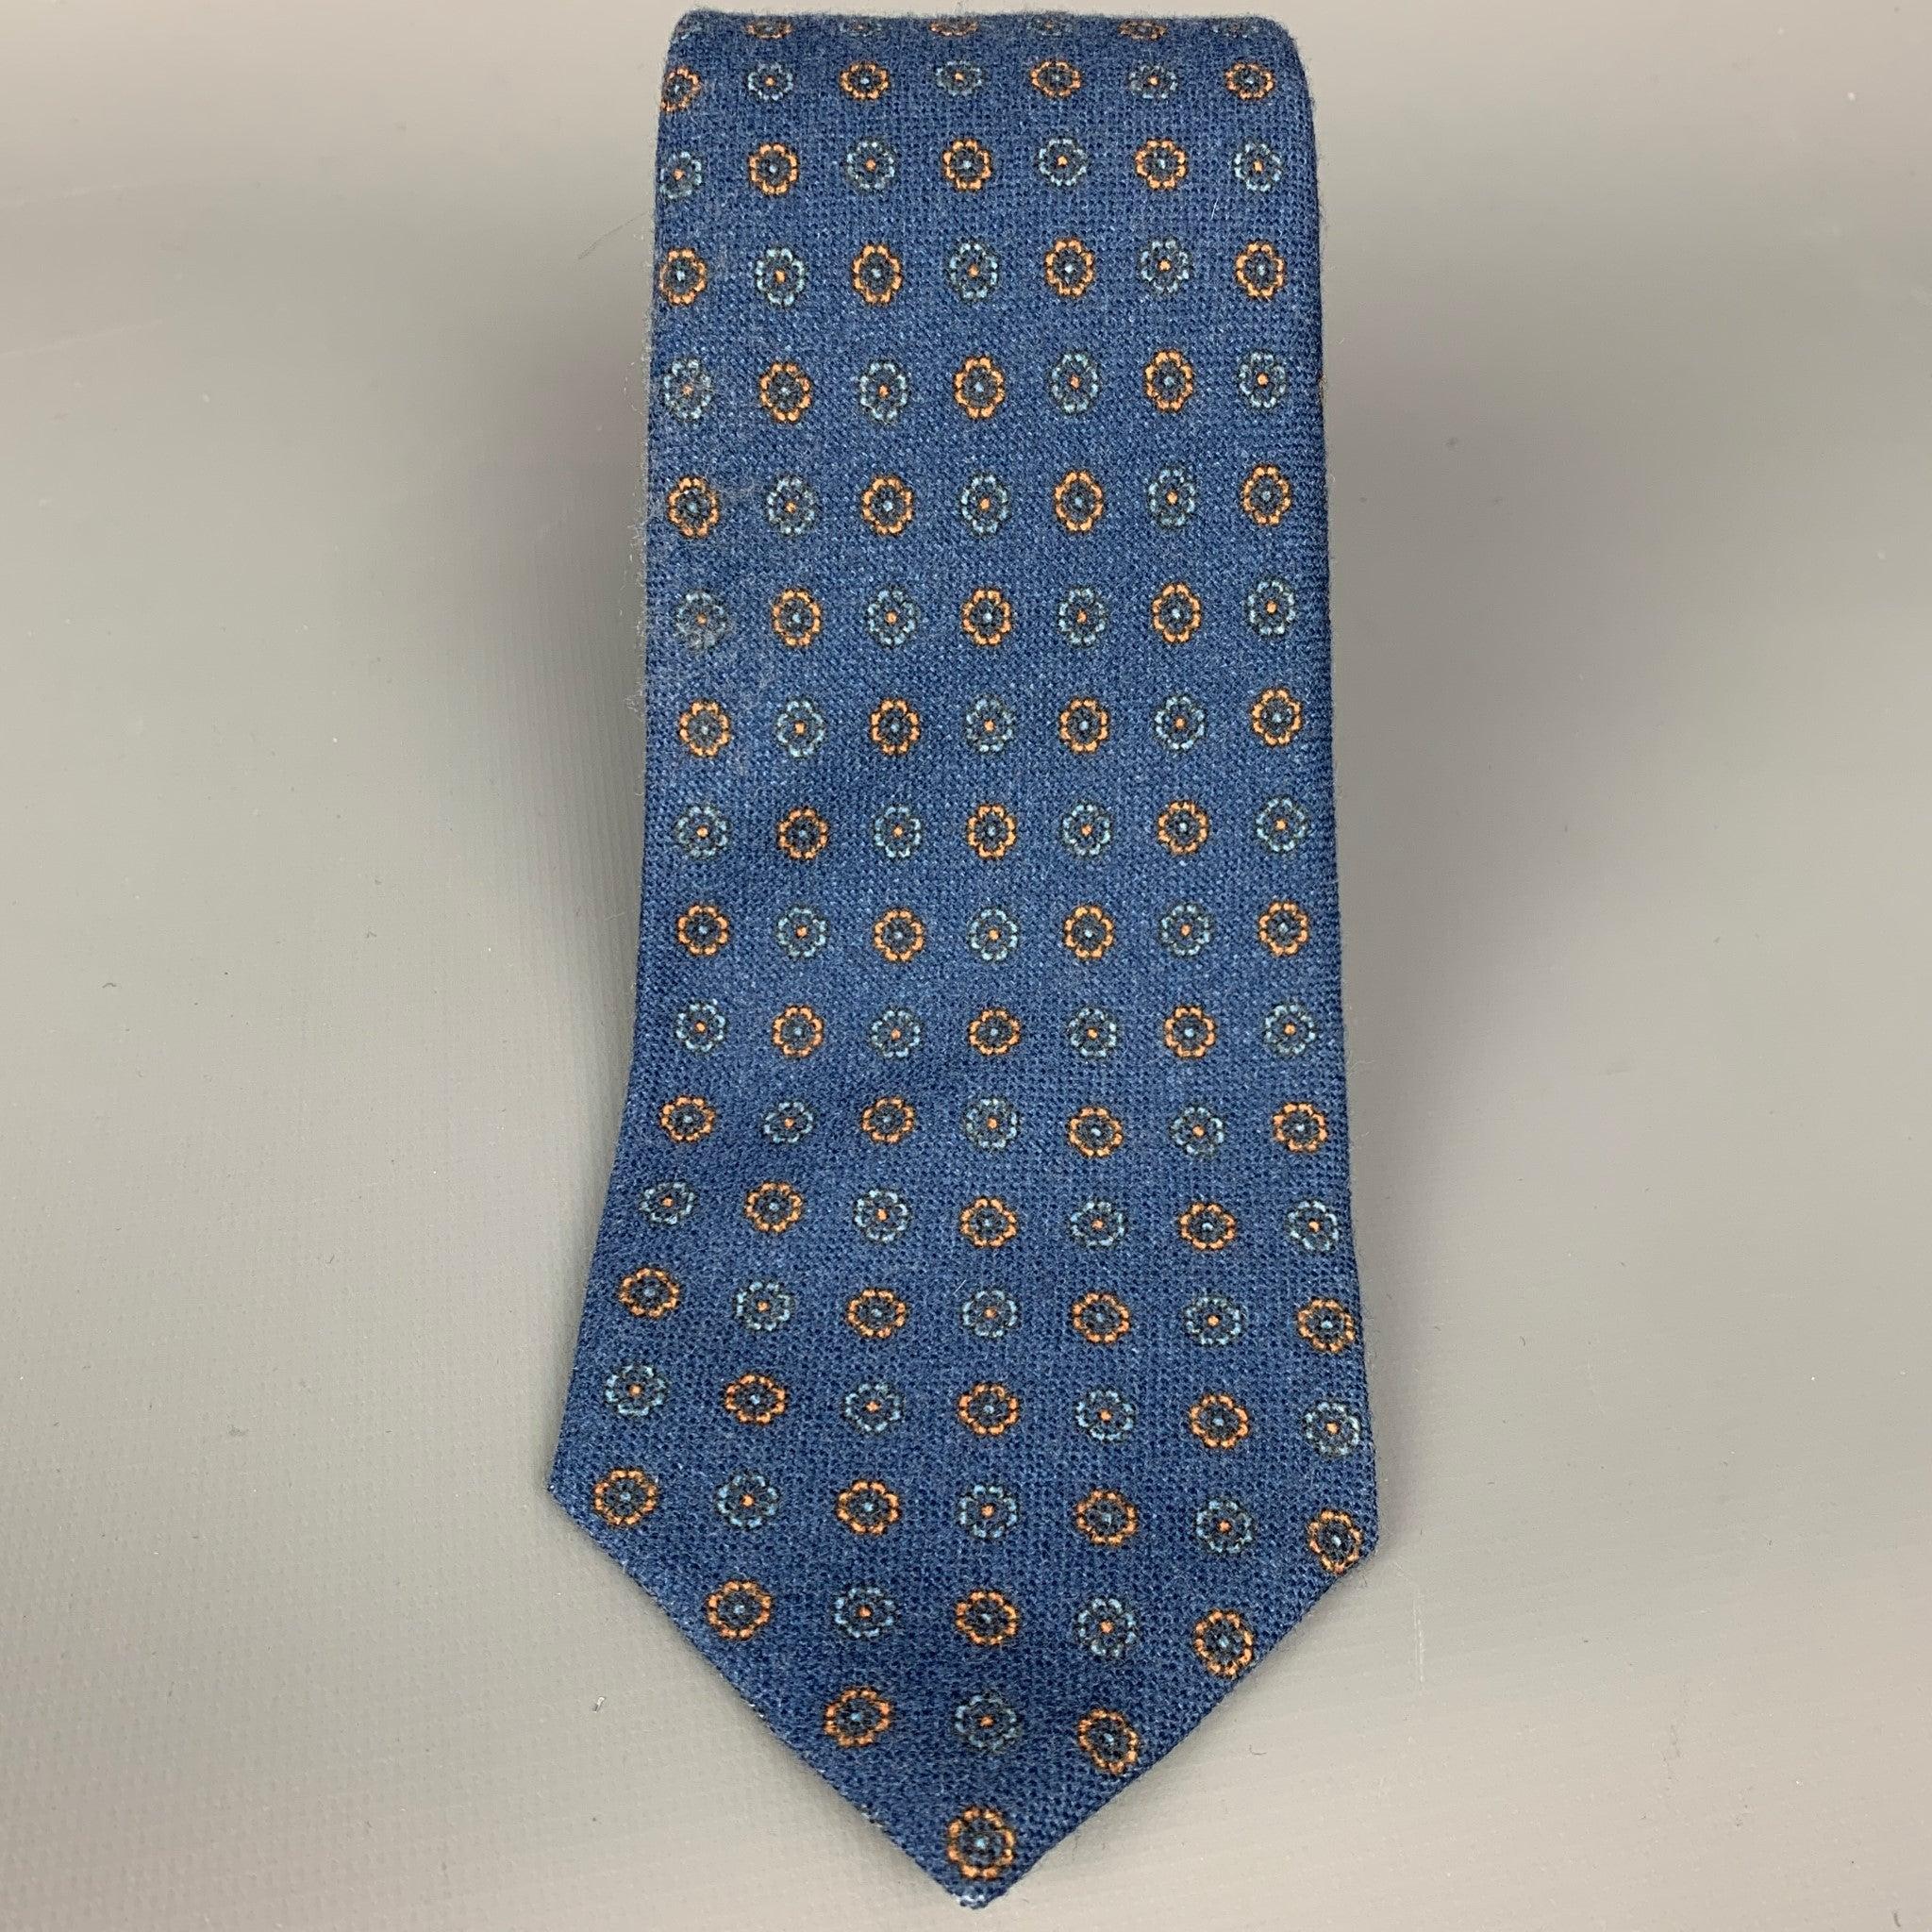 ISAIA neck tie comes in a blue & yellow floral wool. Made in Italy.
Very Good Pre-Owned Condition. 

Measurements: 
  Width: 3.5 inches 
  
  
 
Reference: 108428
Category: Tie
More Details
    
Brand:  ISAIA
Color:  Blue
Color 2:  Yellow
Pattern: 